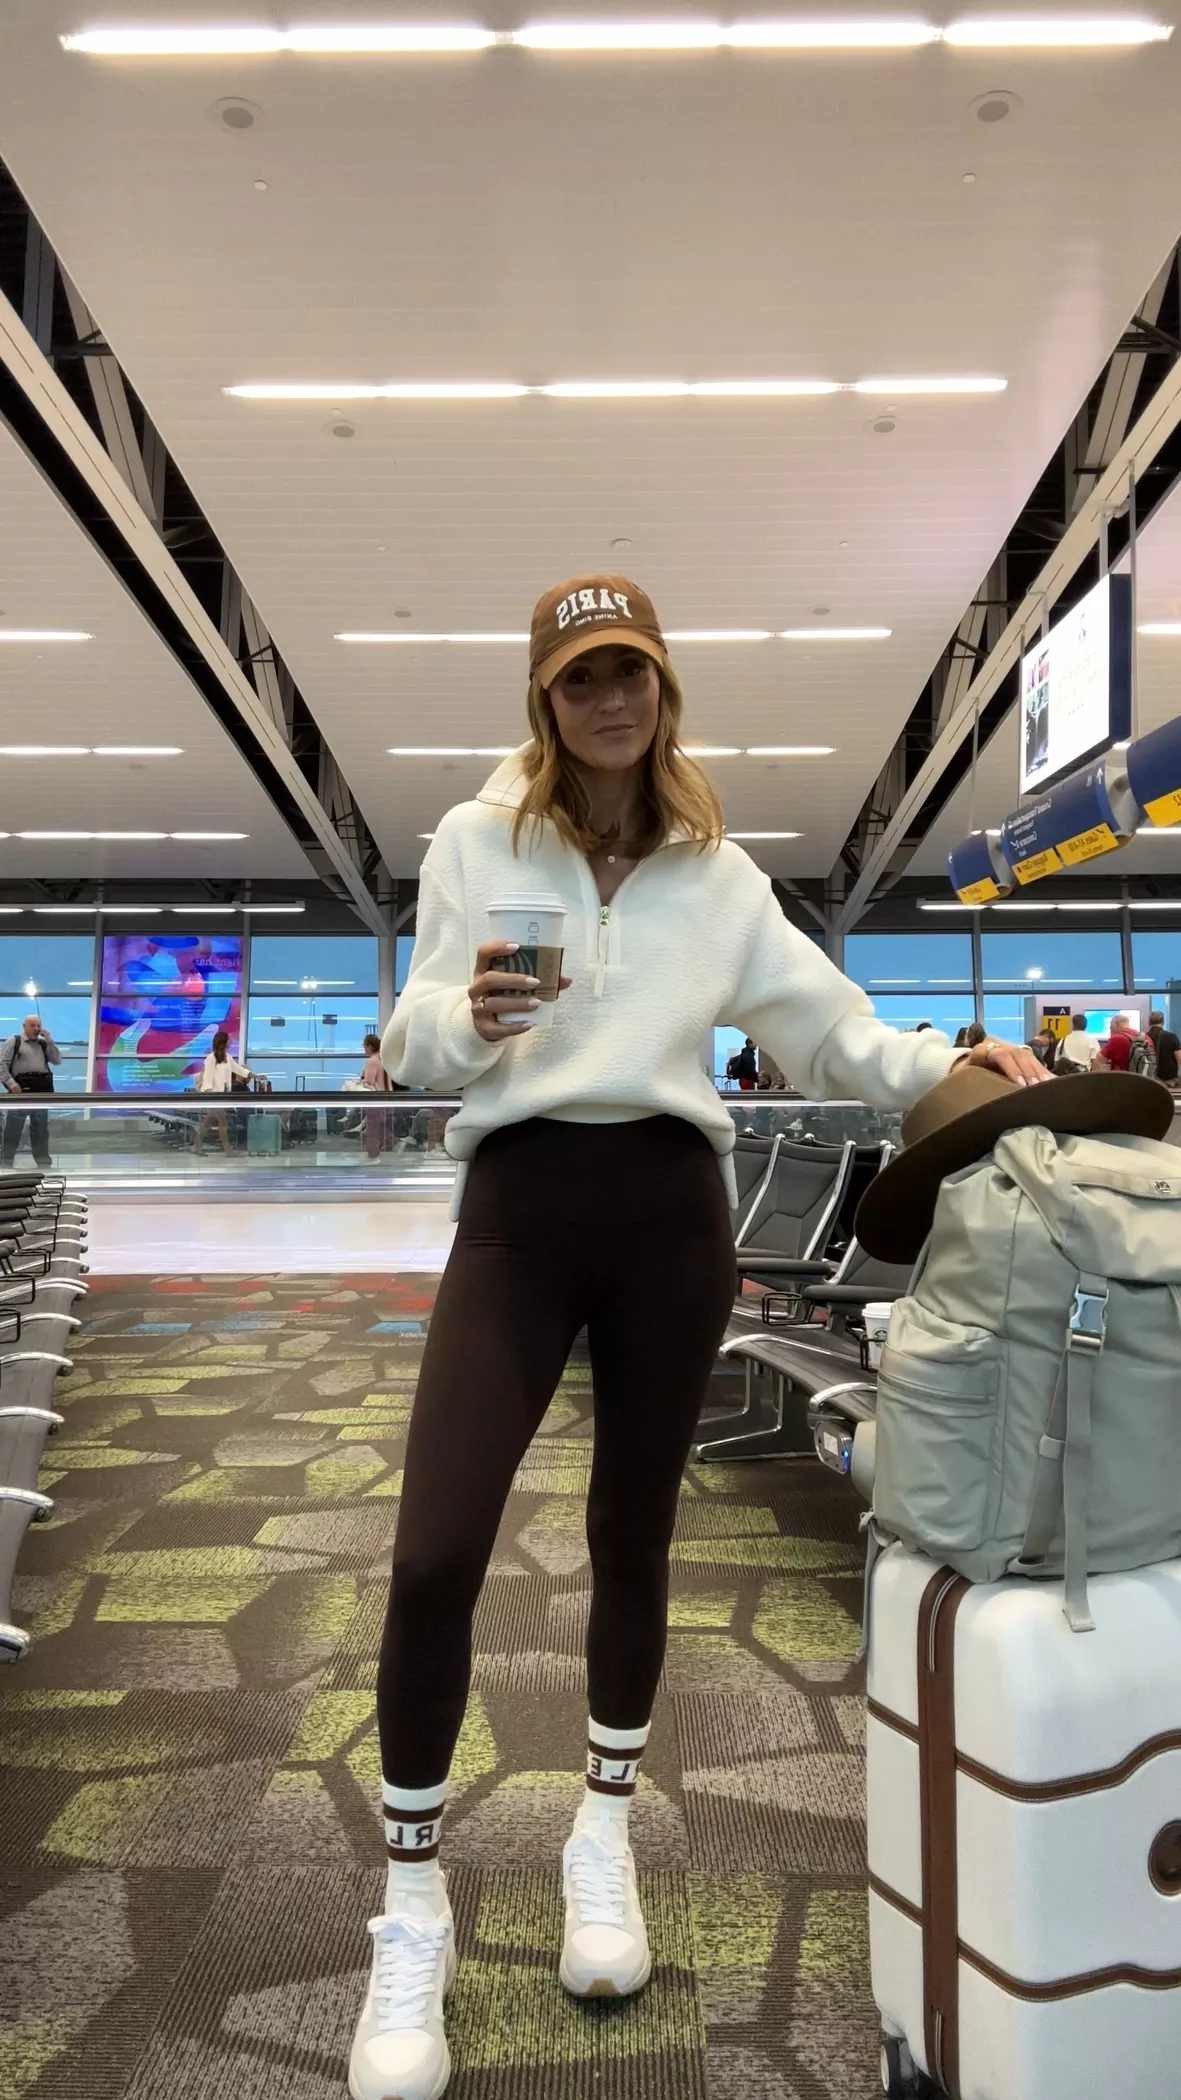 🔗 in B0. Airport travel outfit ideas #ltkstyle #ltkfashion